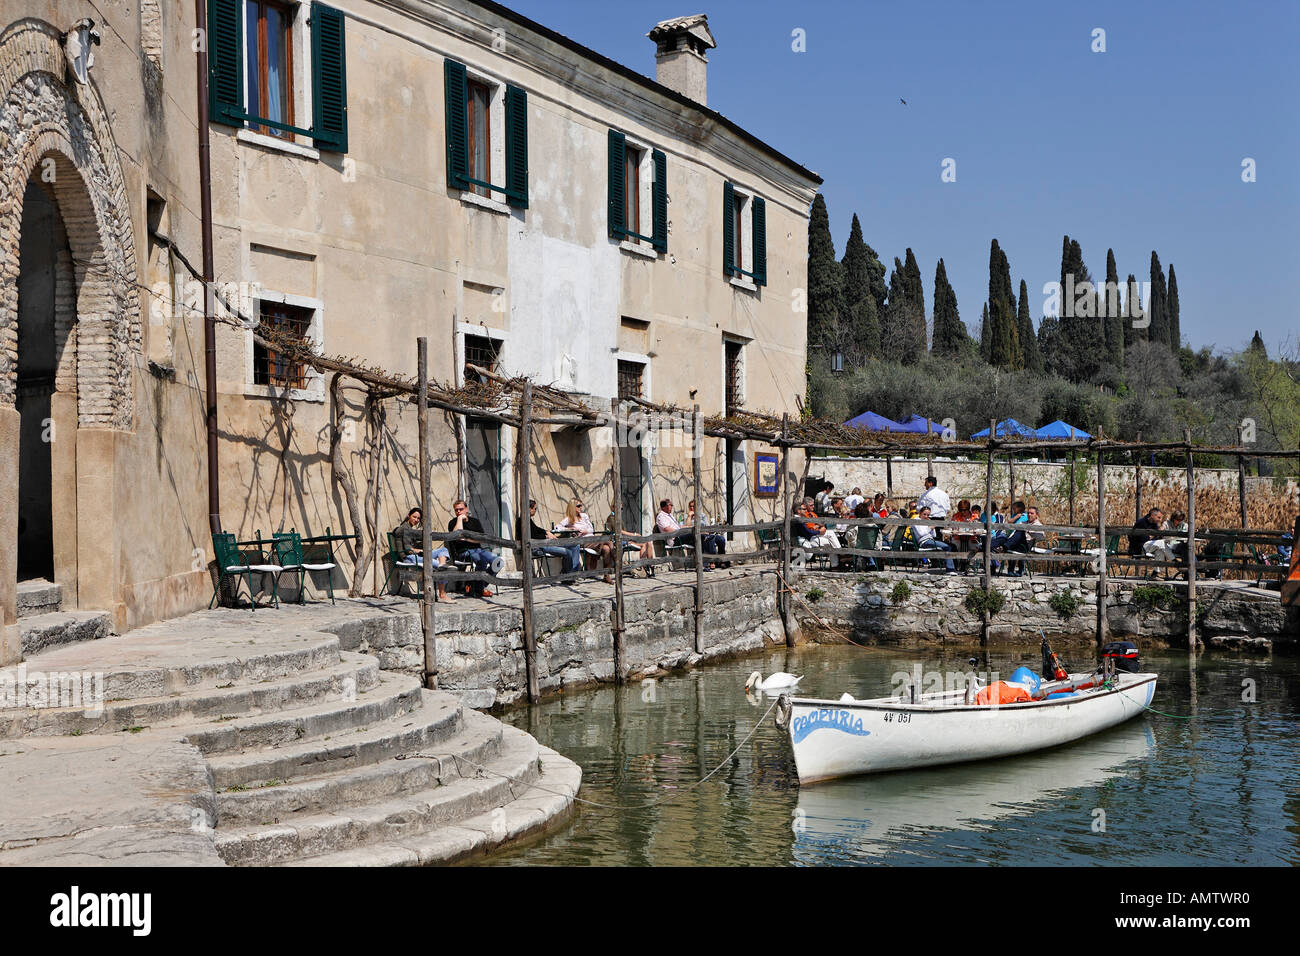 A public cafe at the small harbour of the luxury hotel on the Punta S. Vigilio, Lake Garda, Italy Stock Photo